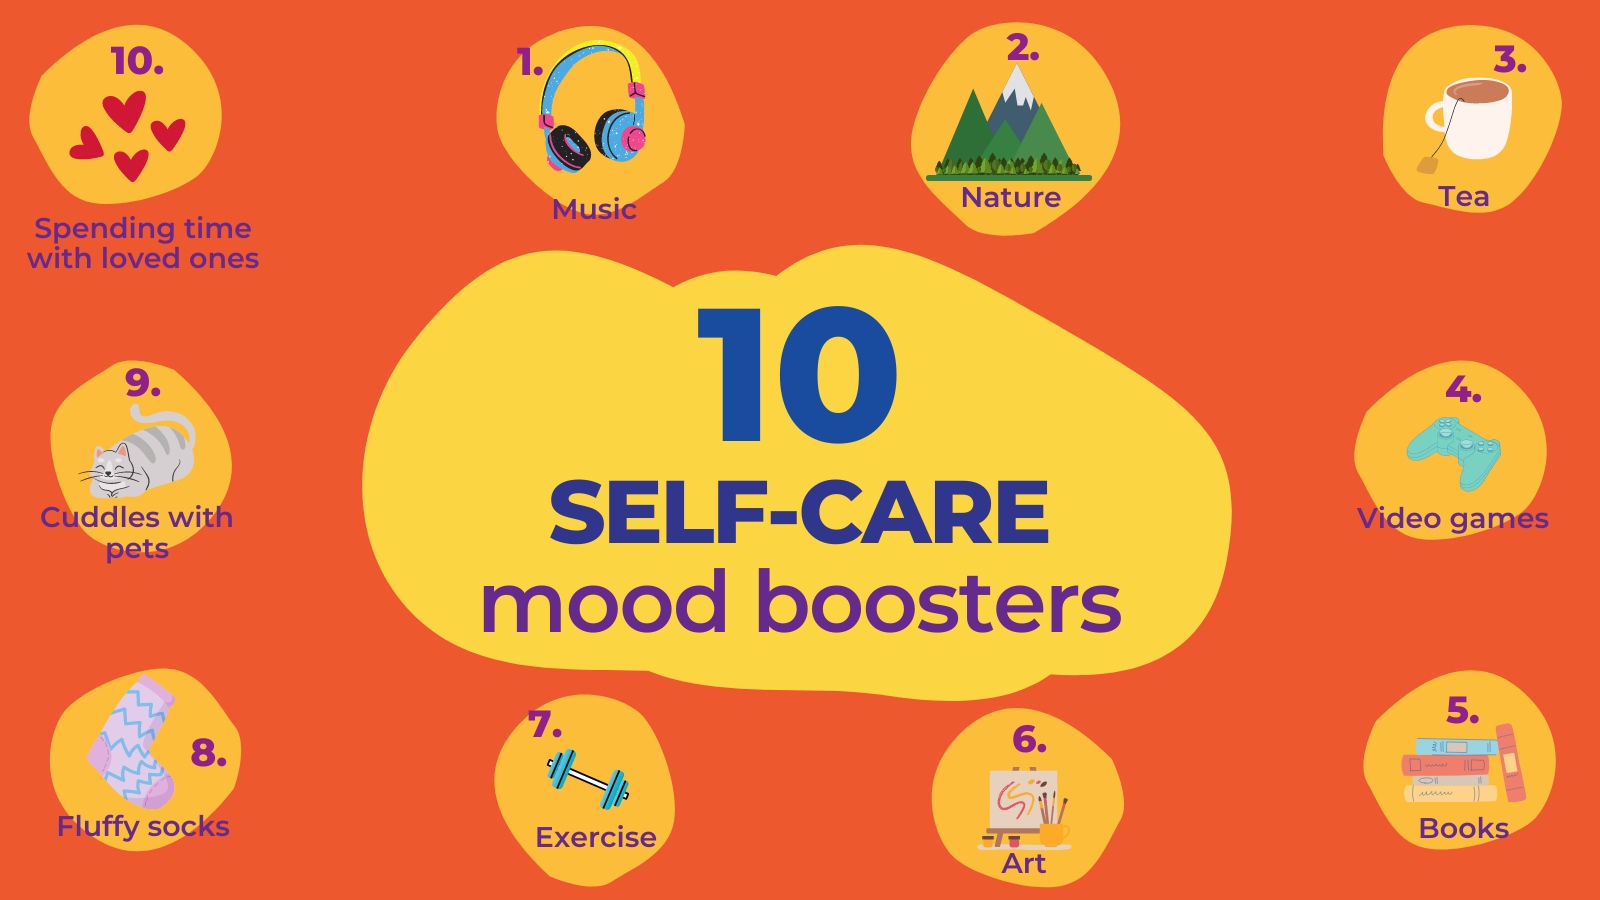 10 Selfcare Mood Boosters: 1 music, 2 nature, 3 tea, 4 video games, 5 books, 6 art, 7 exercise, 8 fluffy socks, 9 cuddles with pets, 10 spending time with loved ones